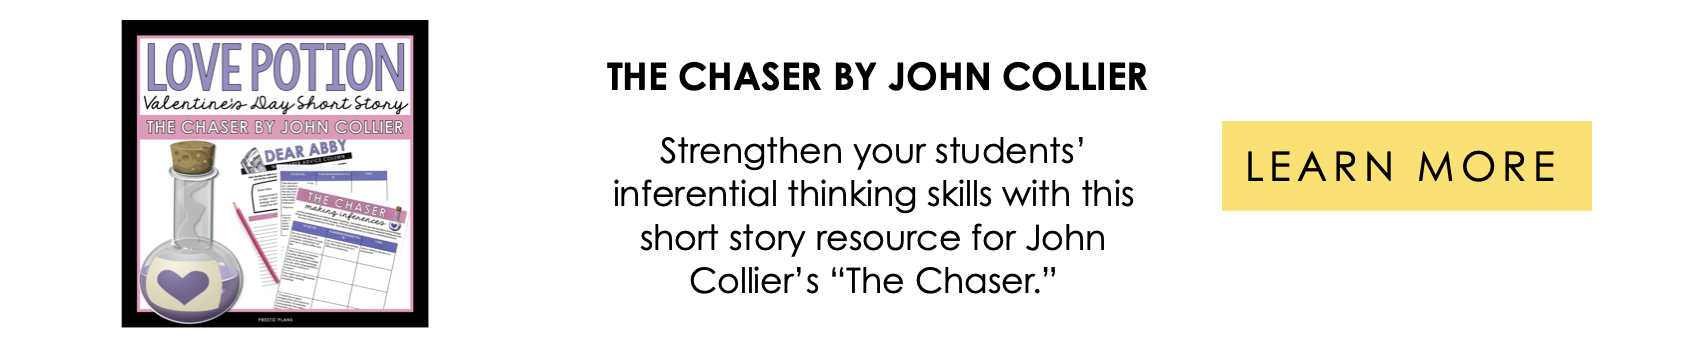 The Chaser by John Collier Short Story Resource Shop This Post